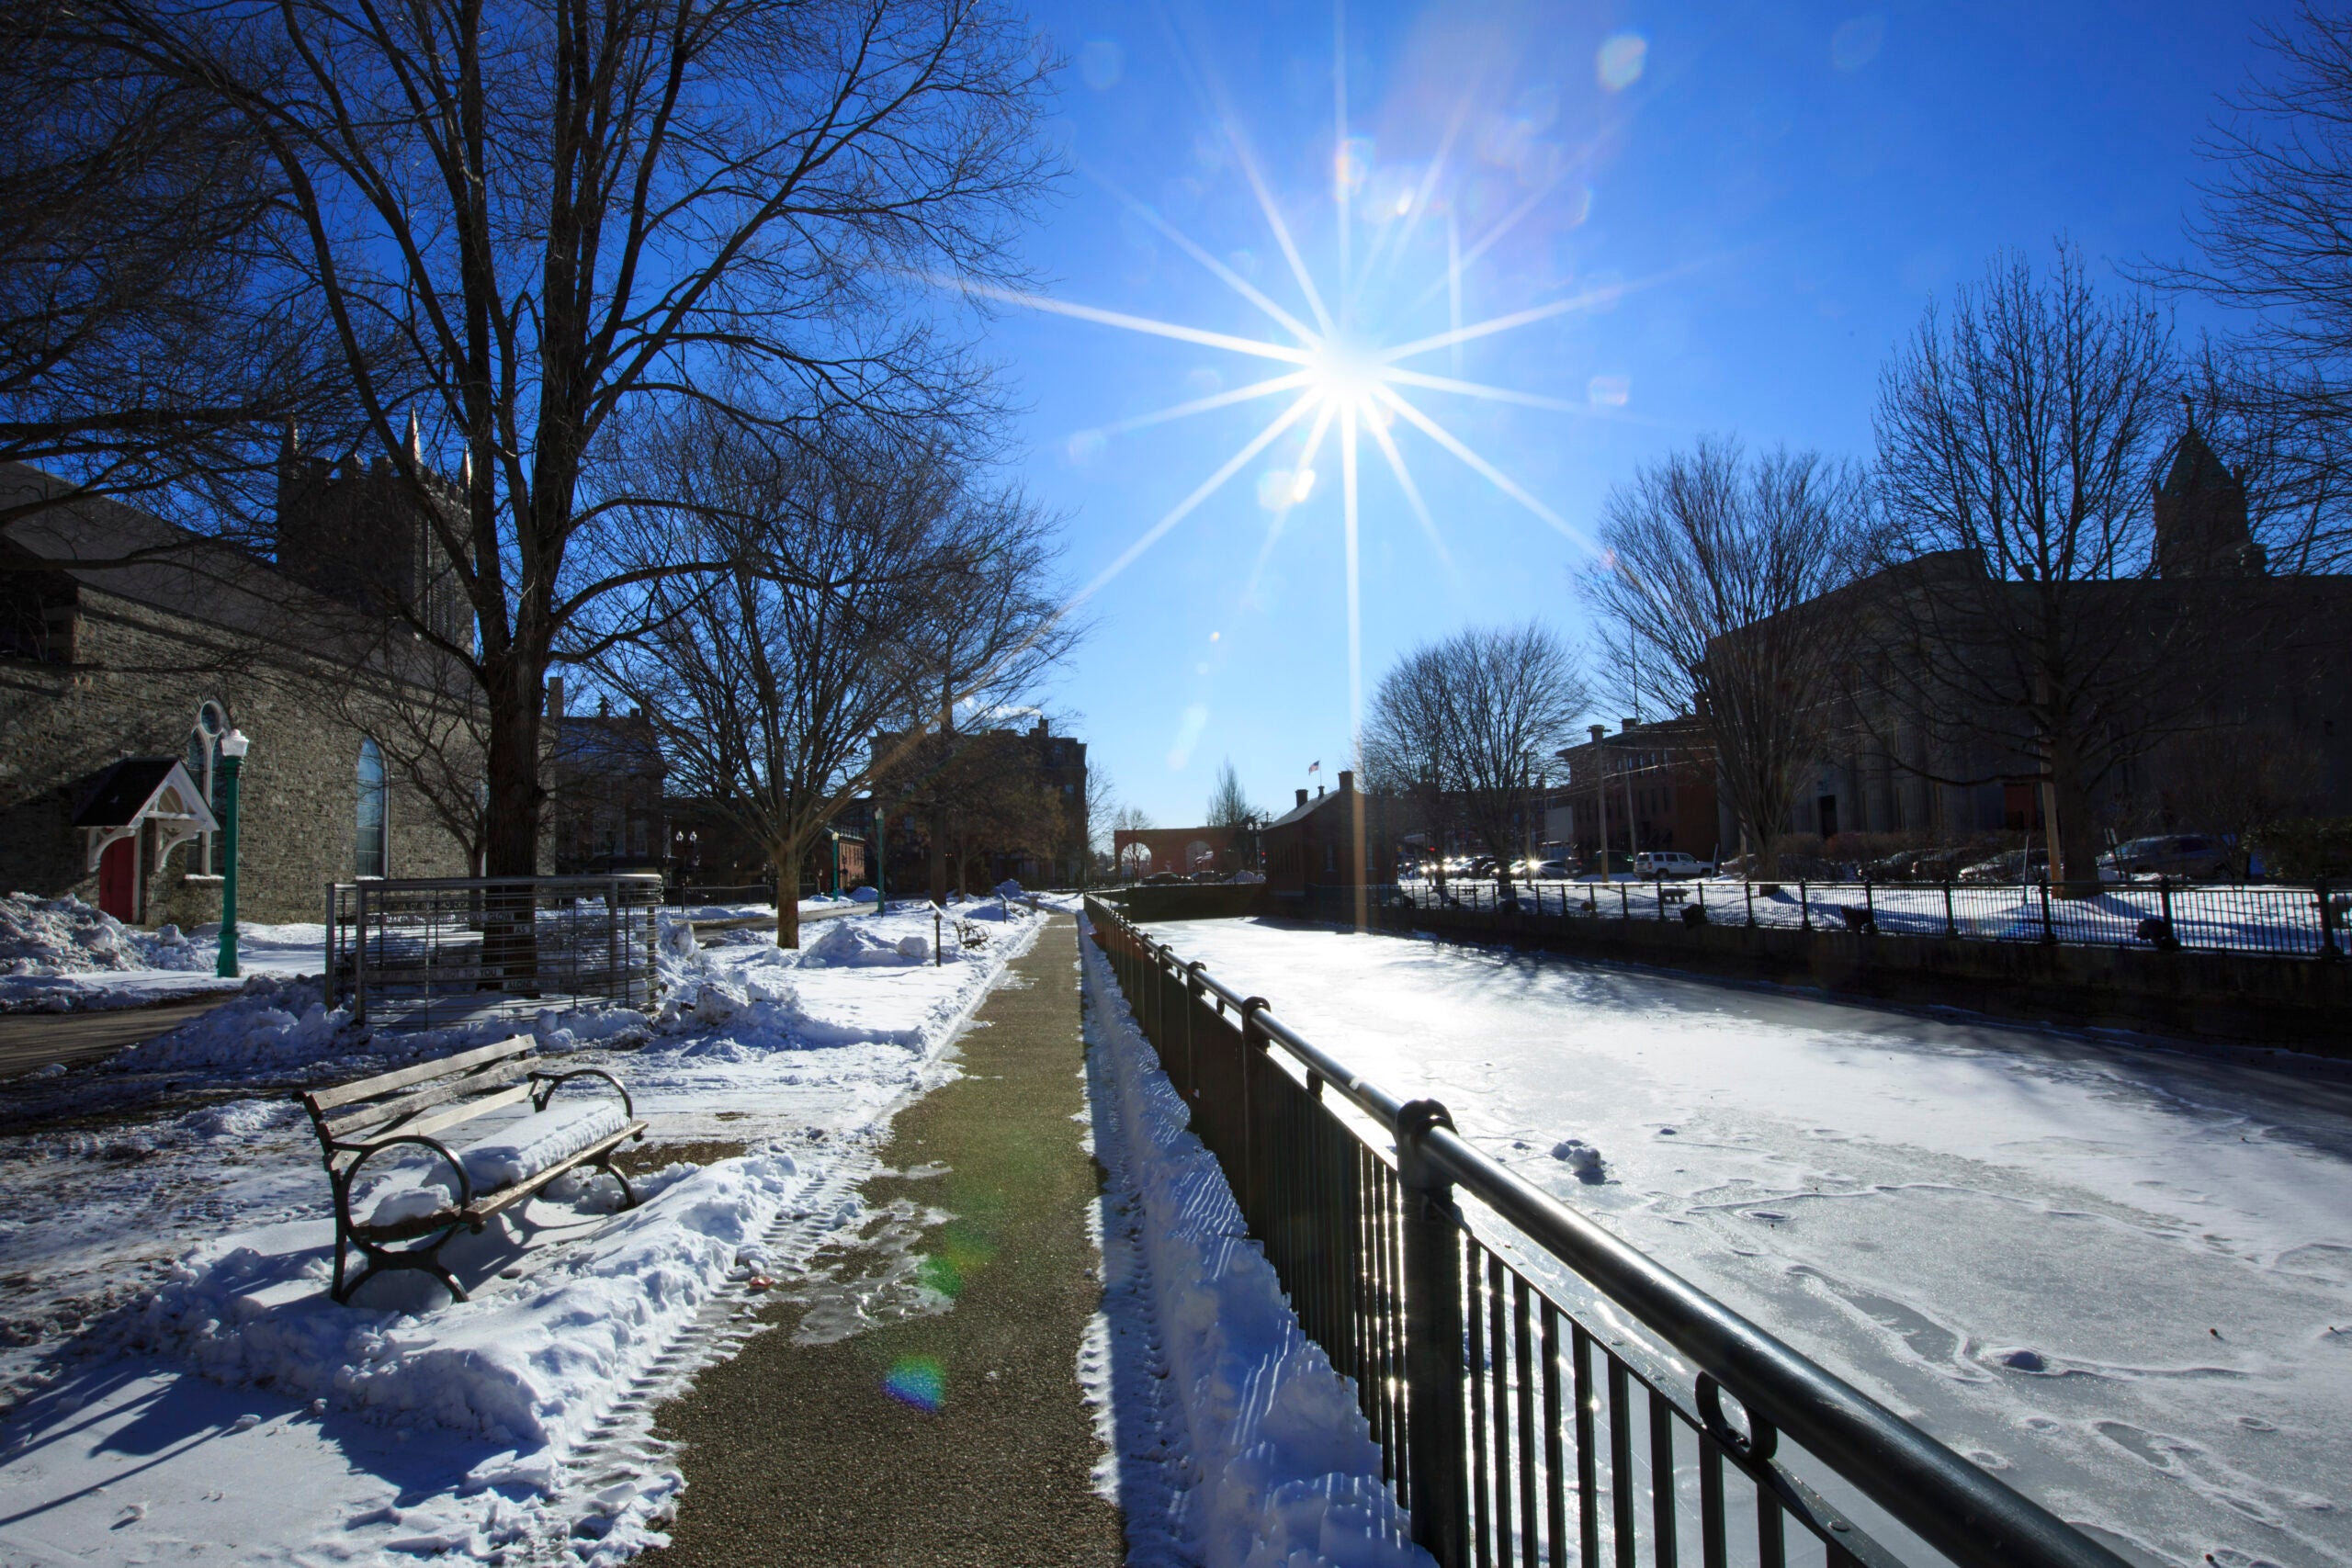 A canal in Lowell on Feb. 14, 2016. A state court jury has awarded $20 million to a Lowell man who filed a lawsuit alleging that his left leg had to be amputated after employees at Lowell General Hospital’s emergency department twice misdiagnosed a painful blood clot as sciatica and sent him home.